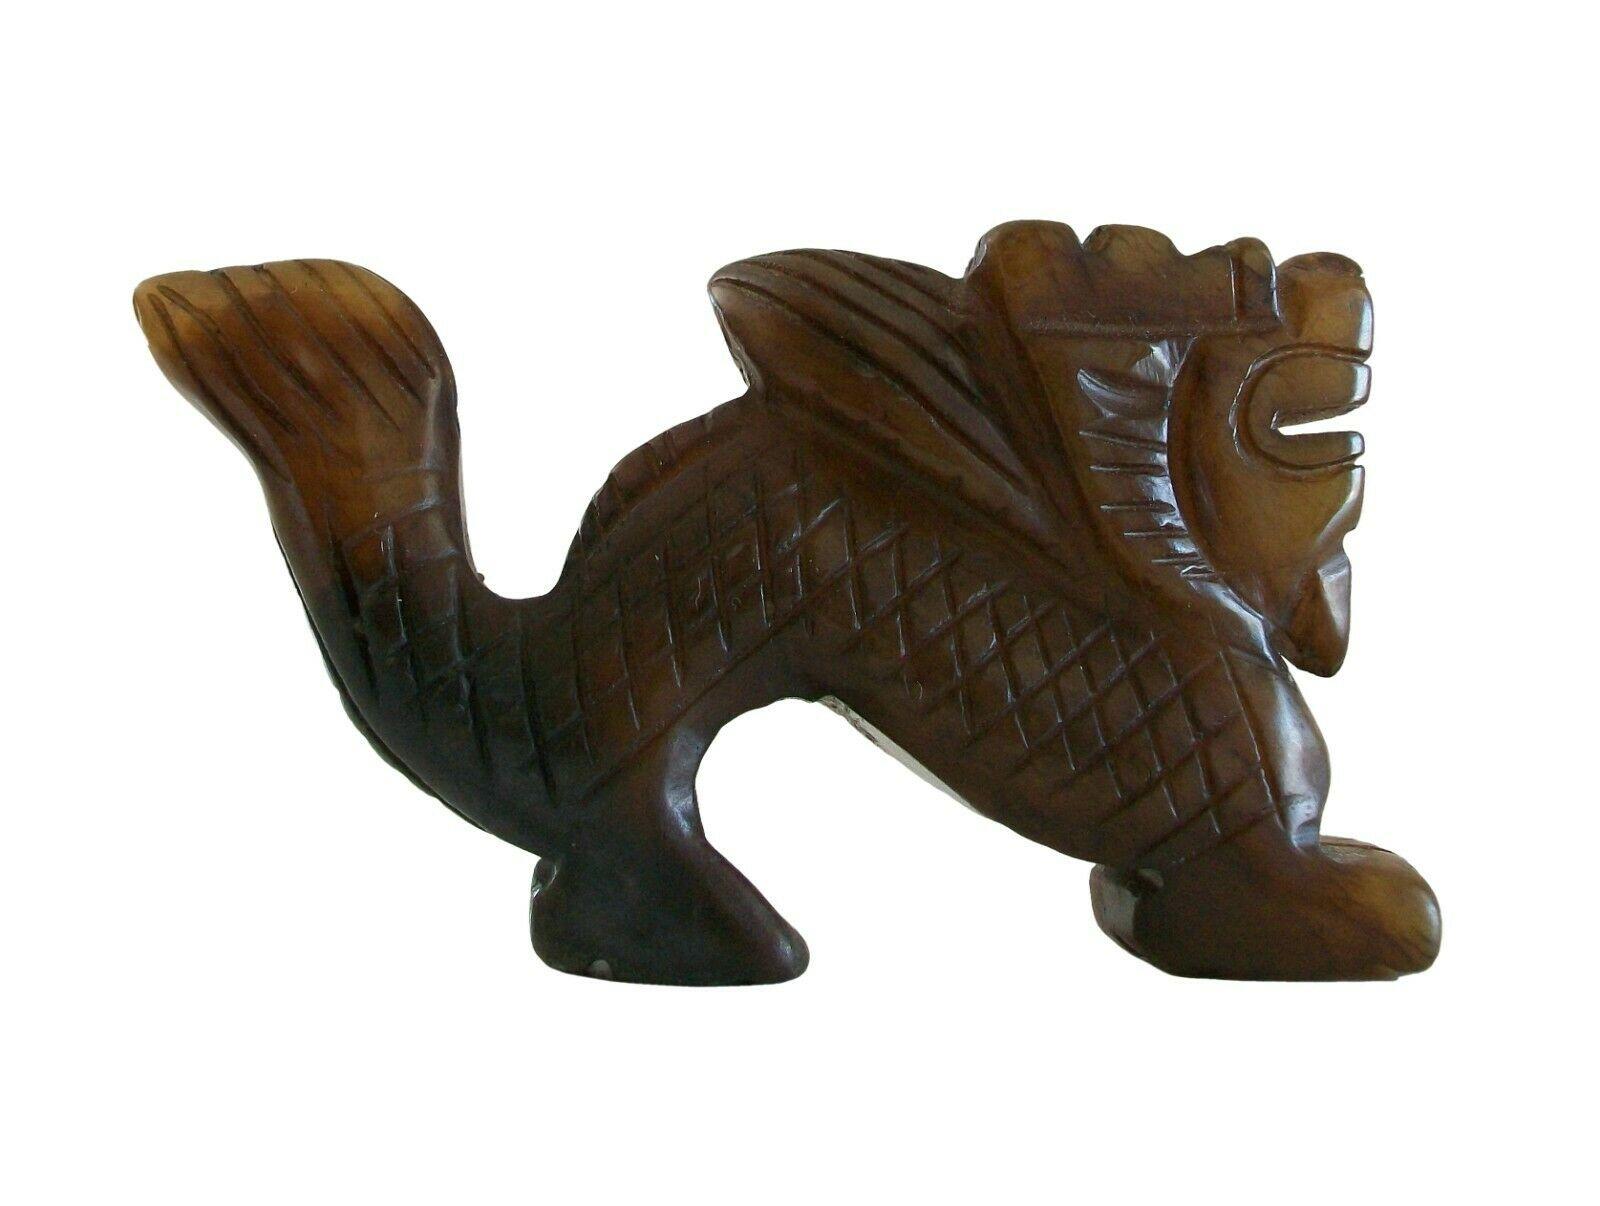 Vintage hand carved brown / amber jadeite dragon amulet - China - mid / late 20th century.

Excellent vintage condition - no loss - no damage - no restoration - minor surface scratches from age and use.

Size / dimensions - small - 3